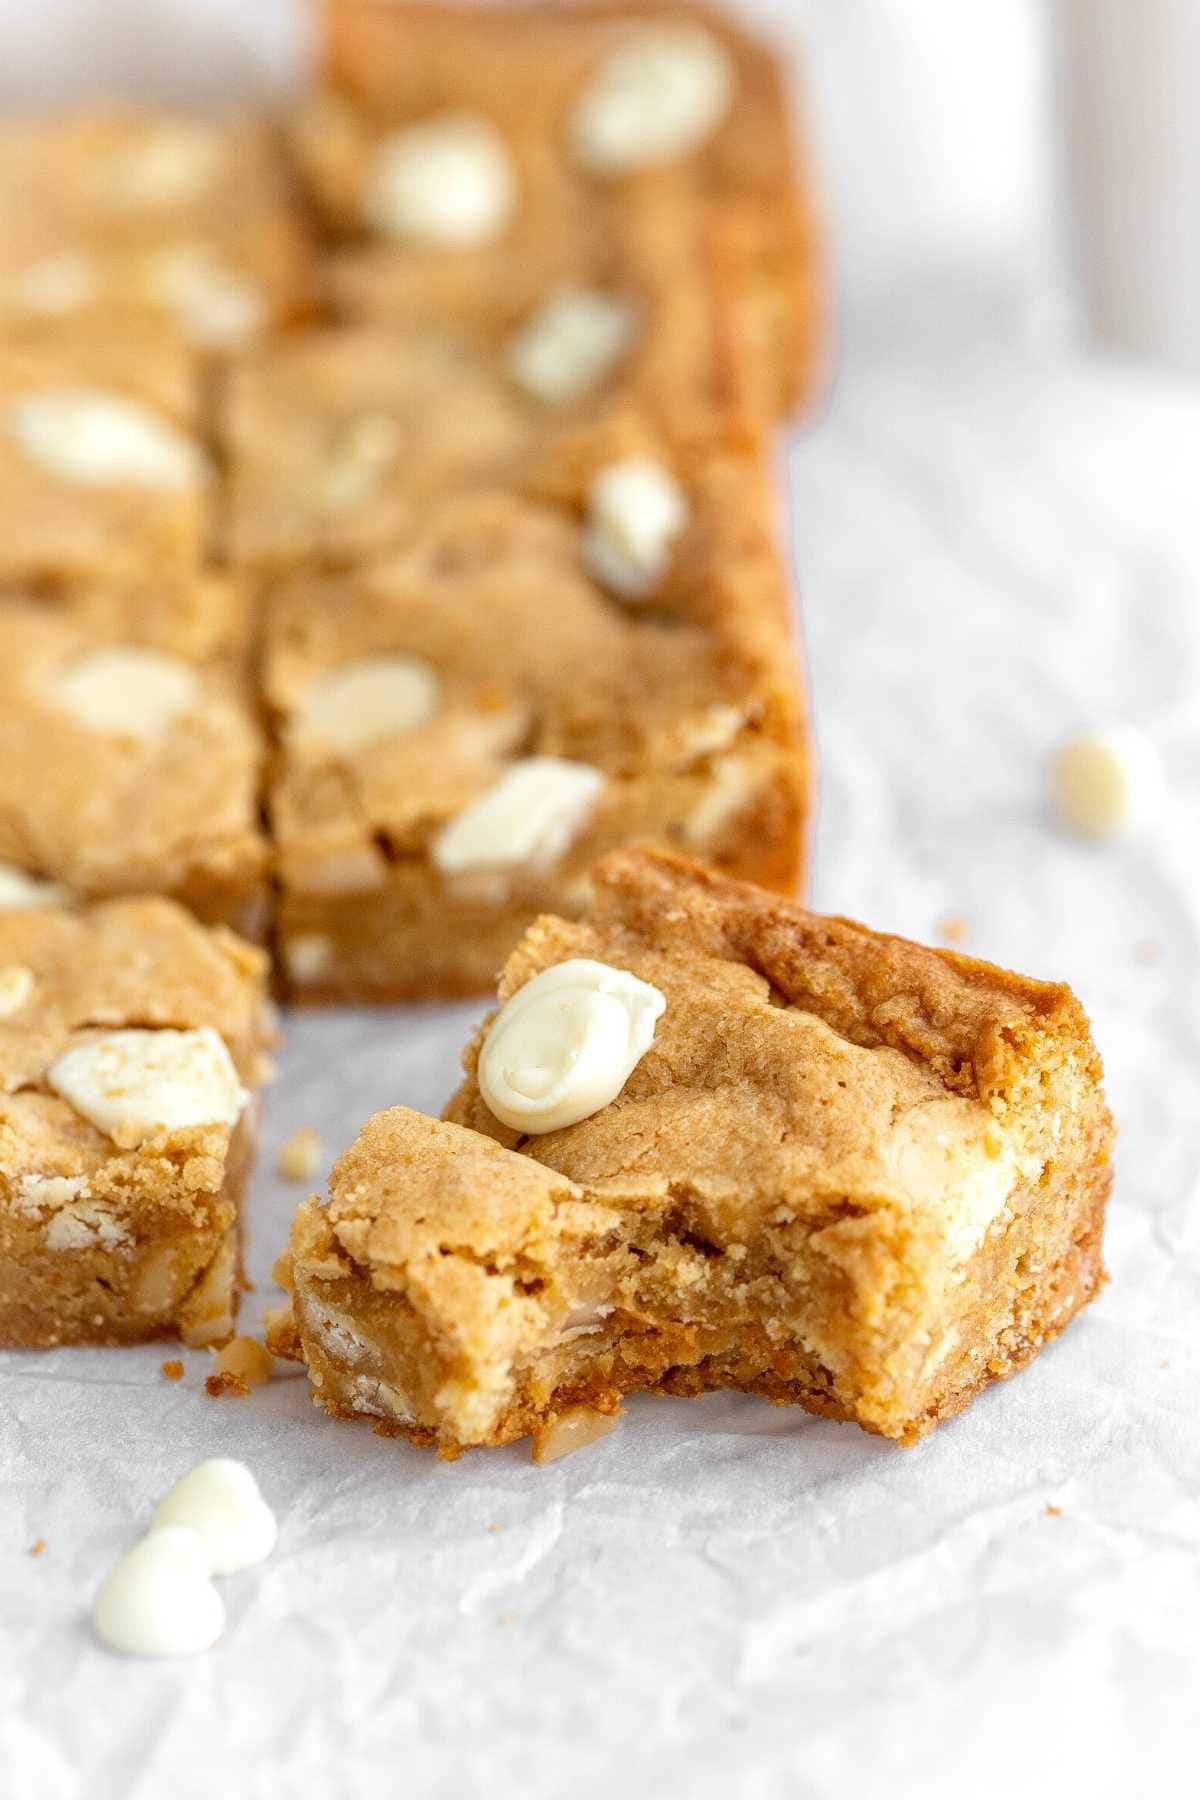 White Chocolate Macadamia Blondies cut and one blondie with bite taken out